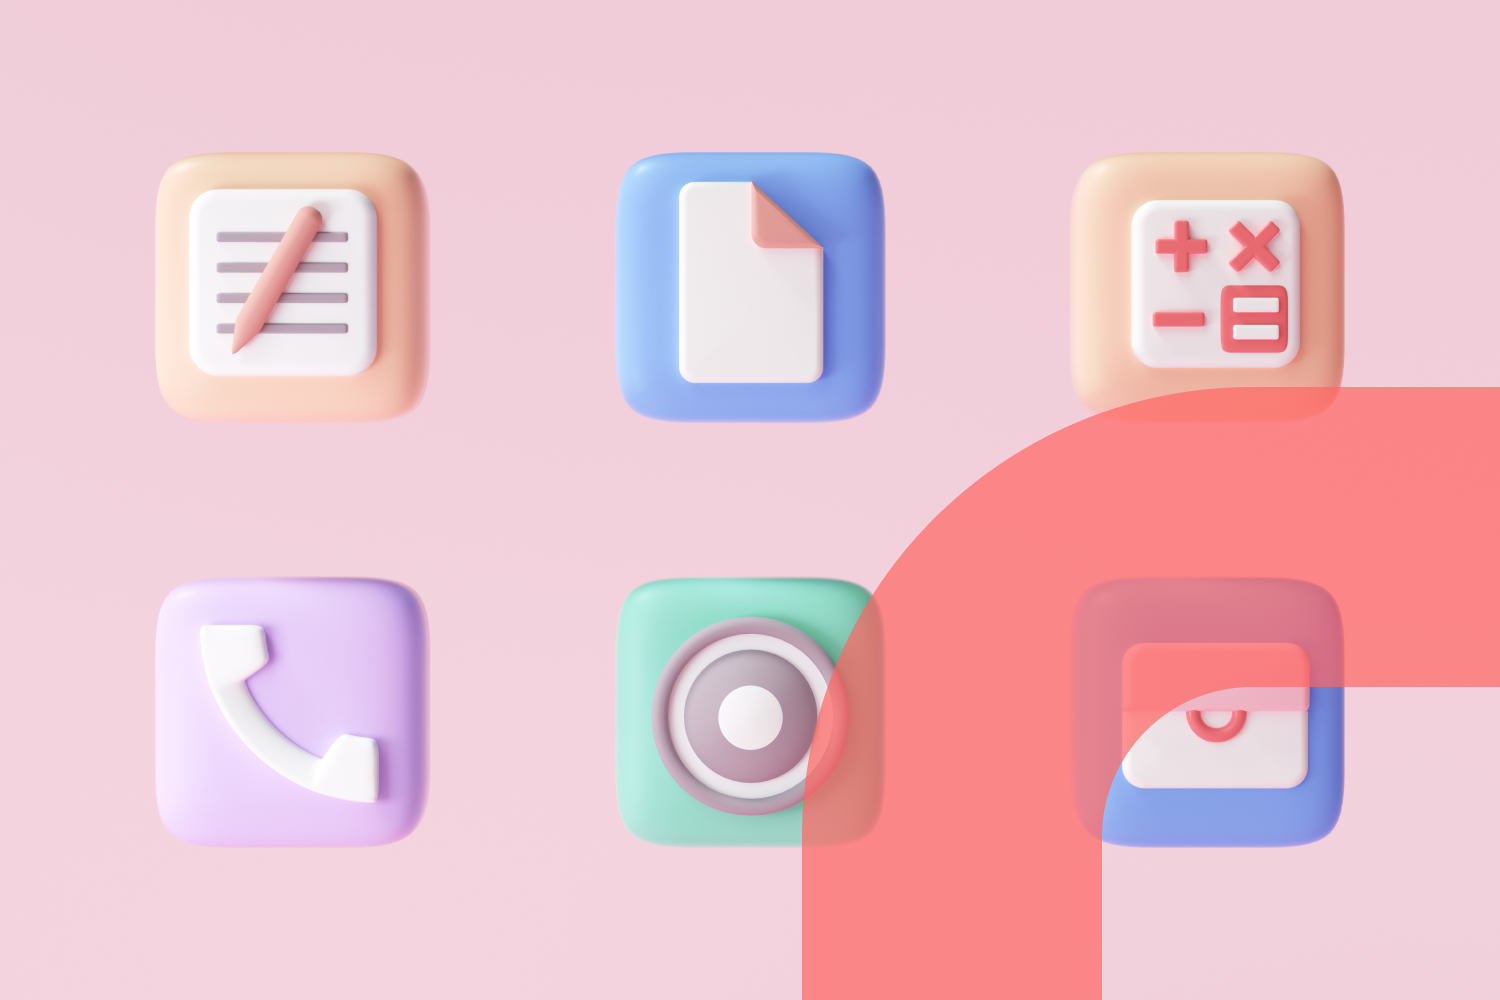 How to Design a Mobile App Icon: 5 Best Practices to Keep in Mind